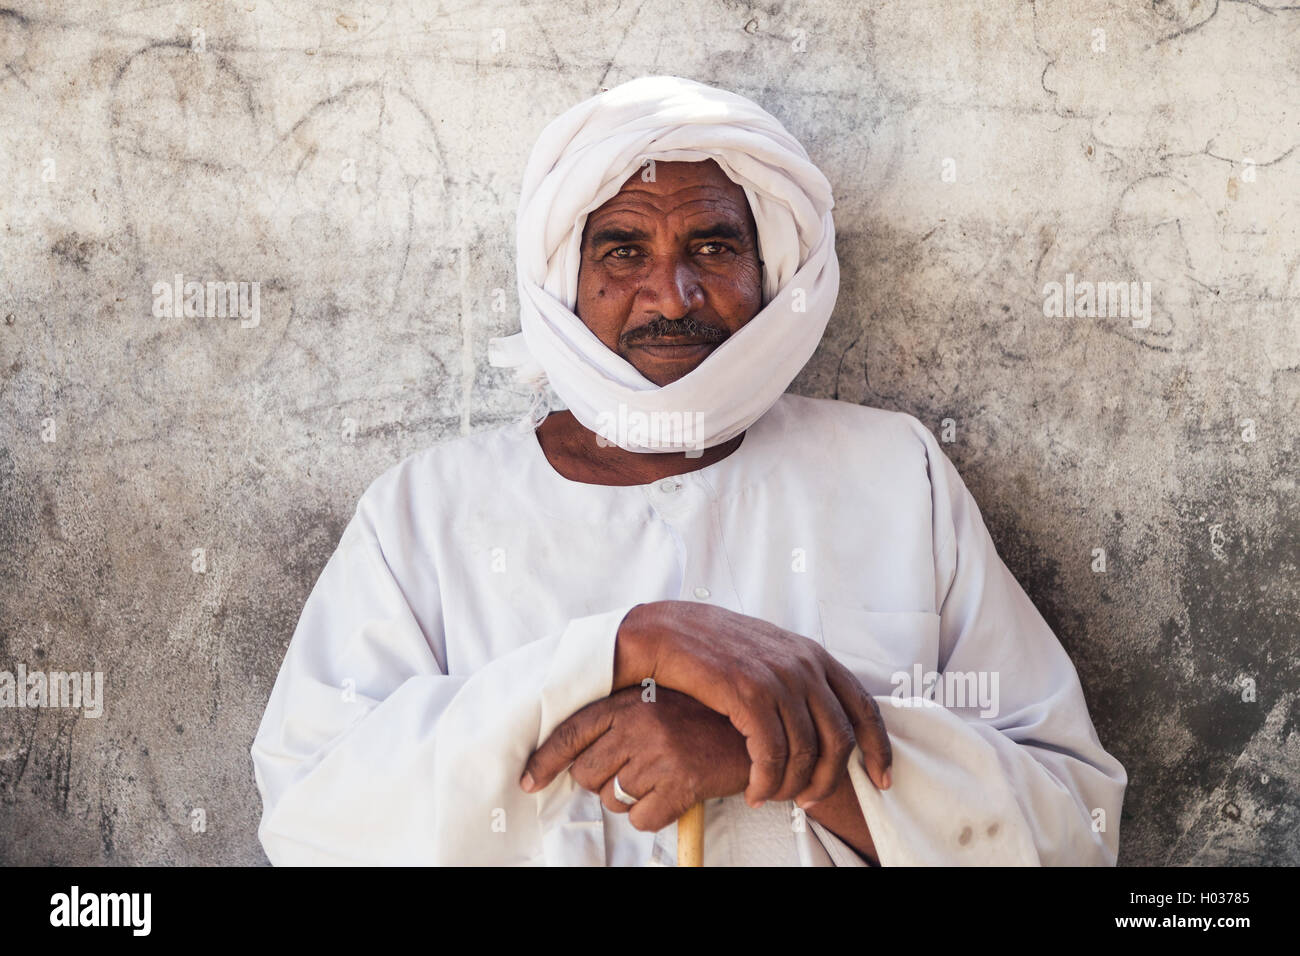 DARAW, EGYPT - FEBRUARY 6, 2016: Portrait of local camel salesman in white clothes and turban. Stock Photo